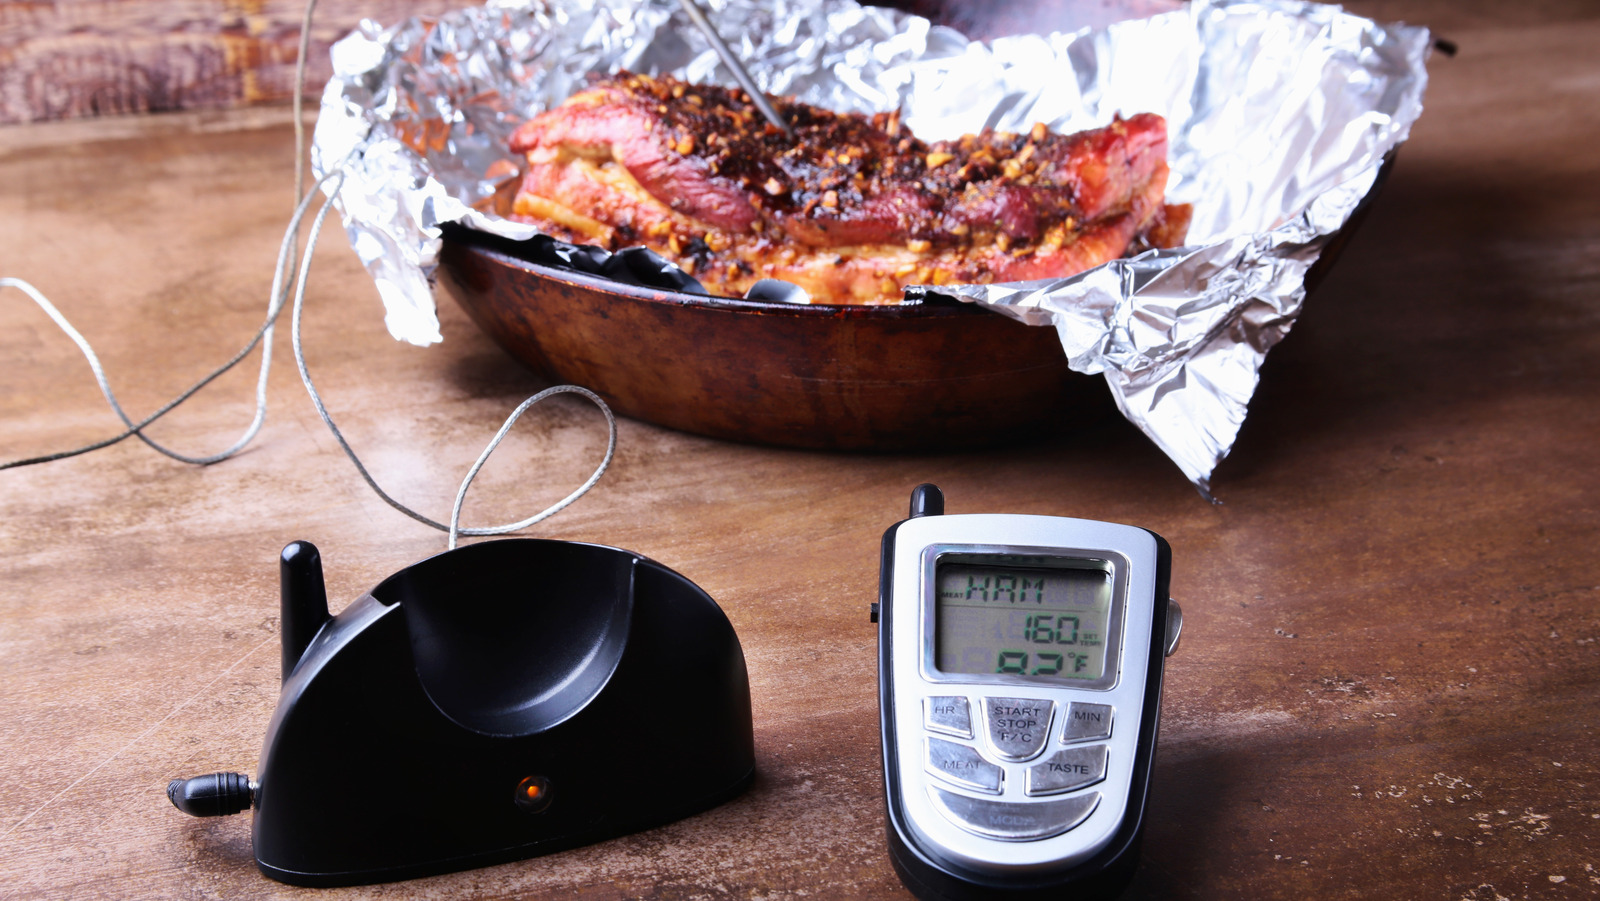 Wireless Bluetooth BBQ Digital Thermometer - Upgraded Stainless Smart, Nutrichef